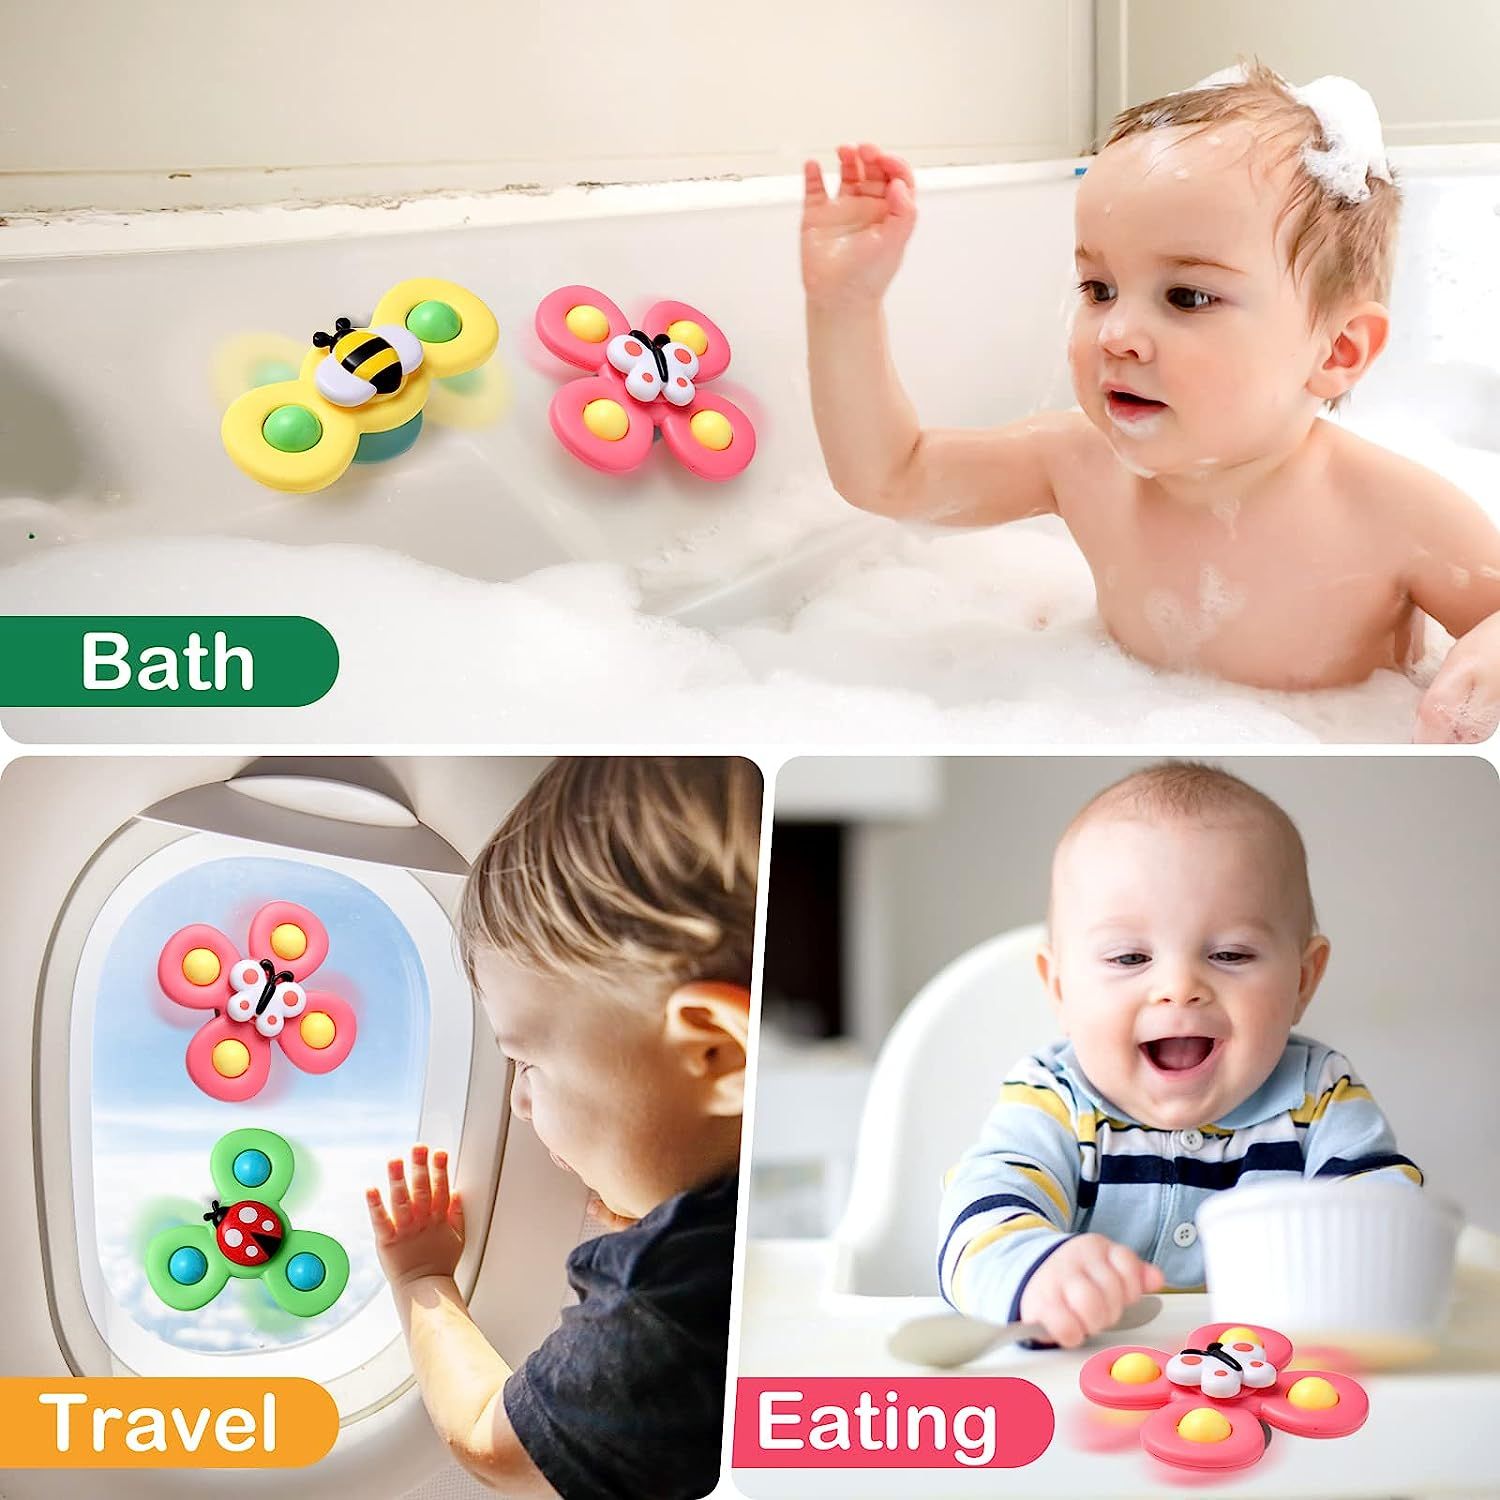  Hooku 3 Pcs Suction Cup Spinner Toys, Baby Fidget